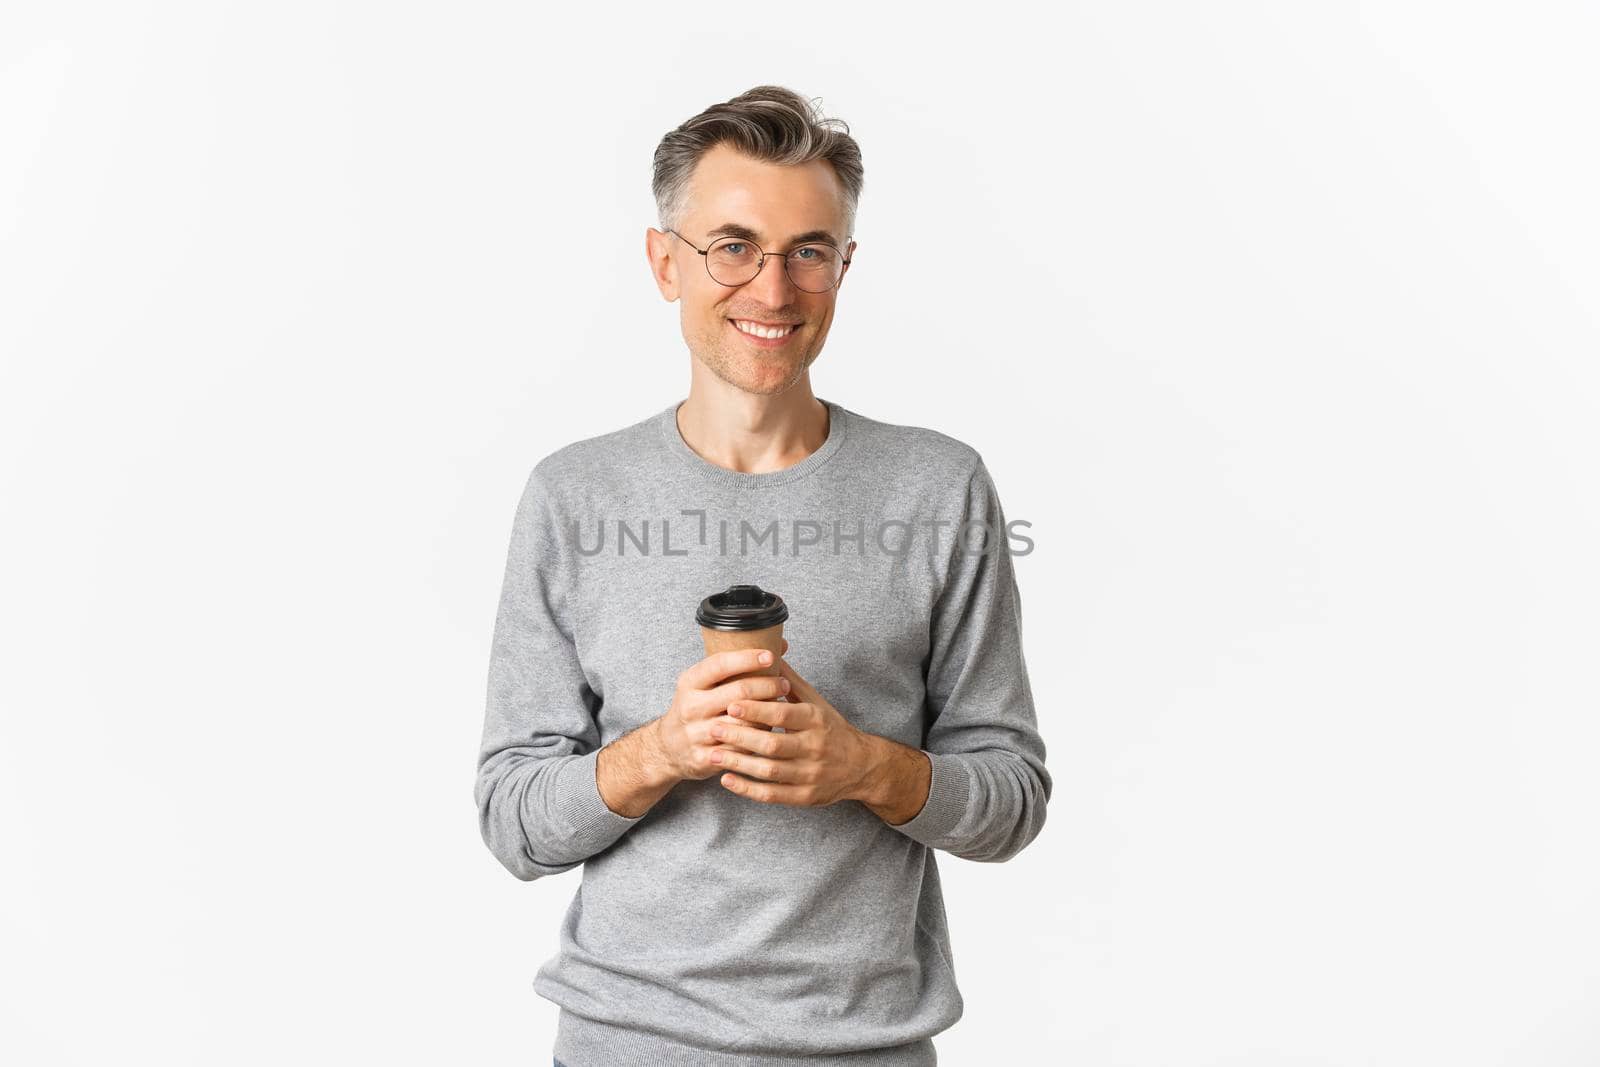 Image of handsome middle-aged man with grey short hair, wearing glasses and grey sweater, drinking coffee and smiling pleased, standing over white background.